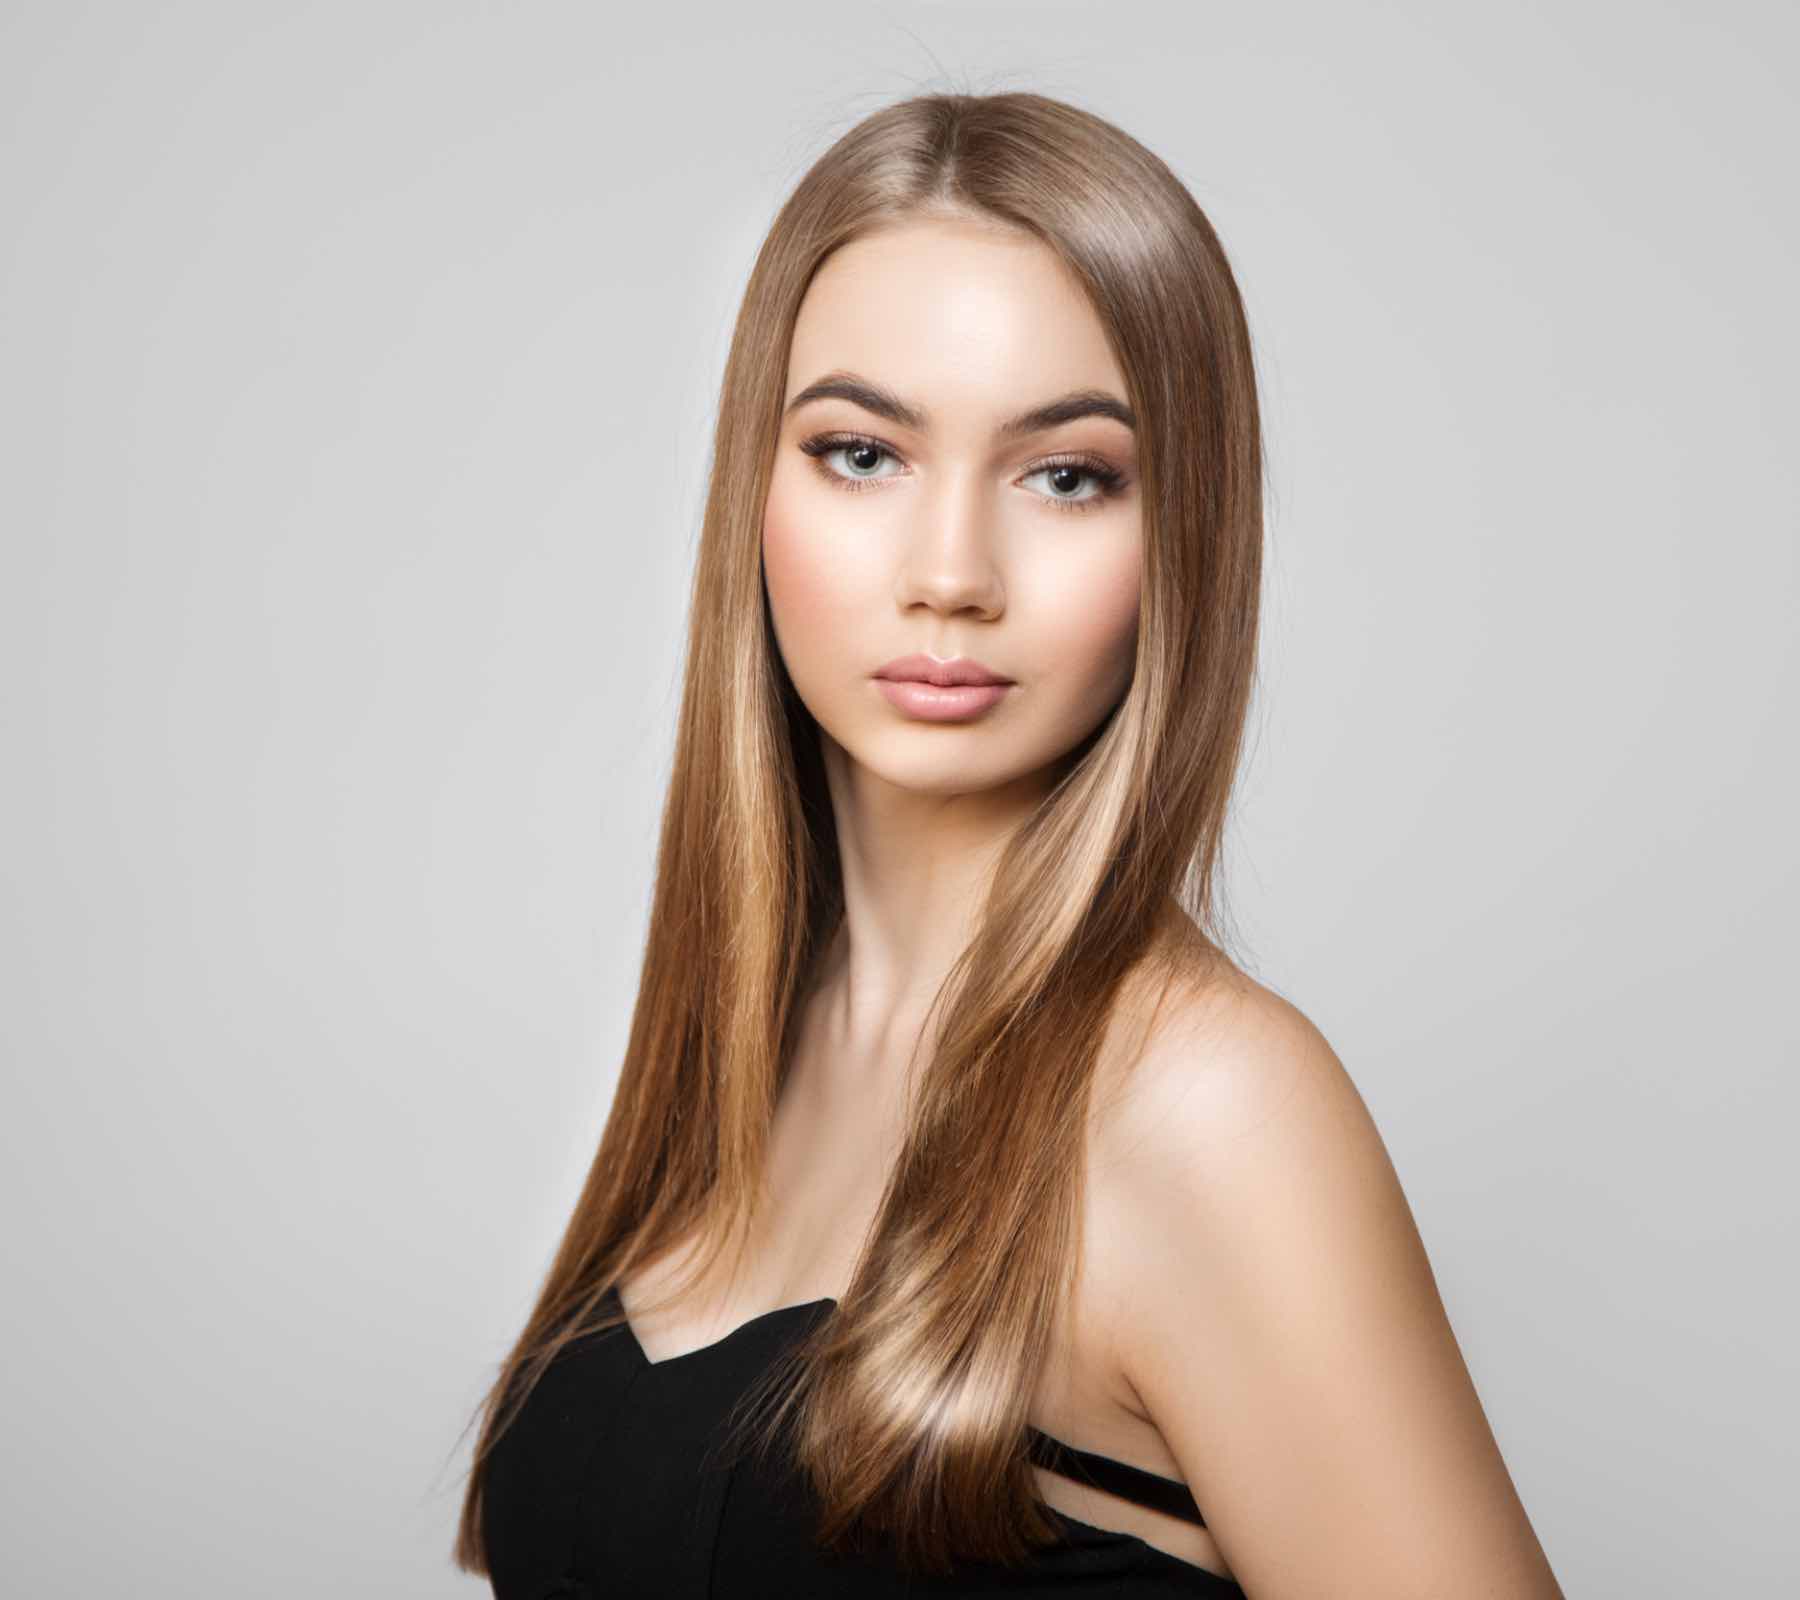 Keratin smoothing treatments with Lemon Tree help make your hair manageabe and smooth.